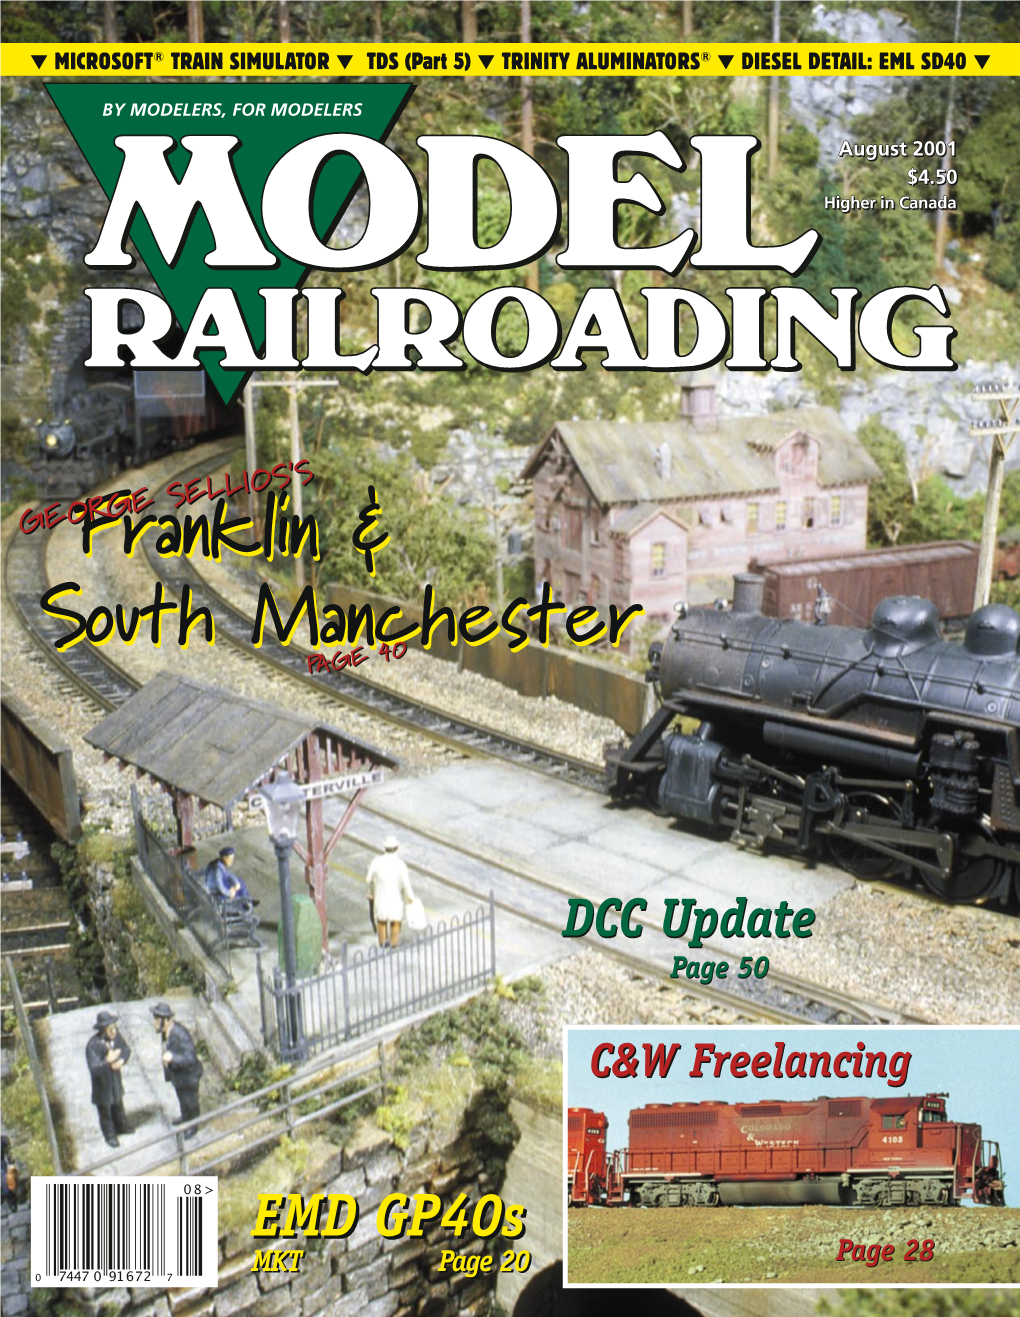 2001 MODEL RAILROADING ▼ 5 ESCAPE to S SCALE Enjoy the Great Advantages of S Scale, the Mid-Size Scale More Model Railroaders Are Turning To